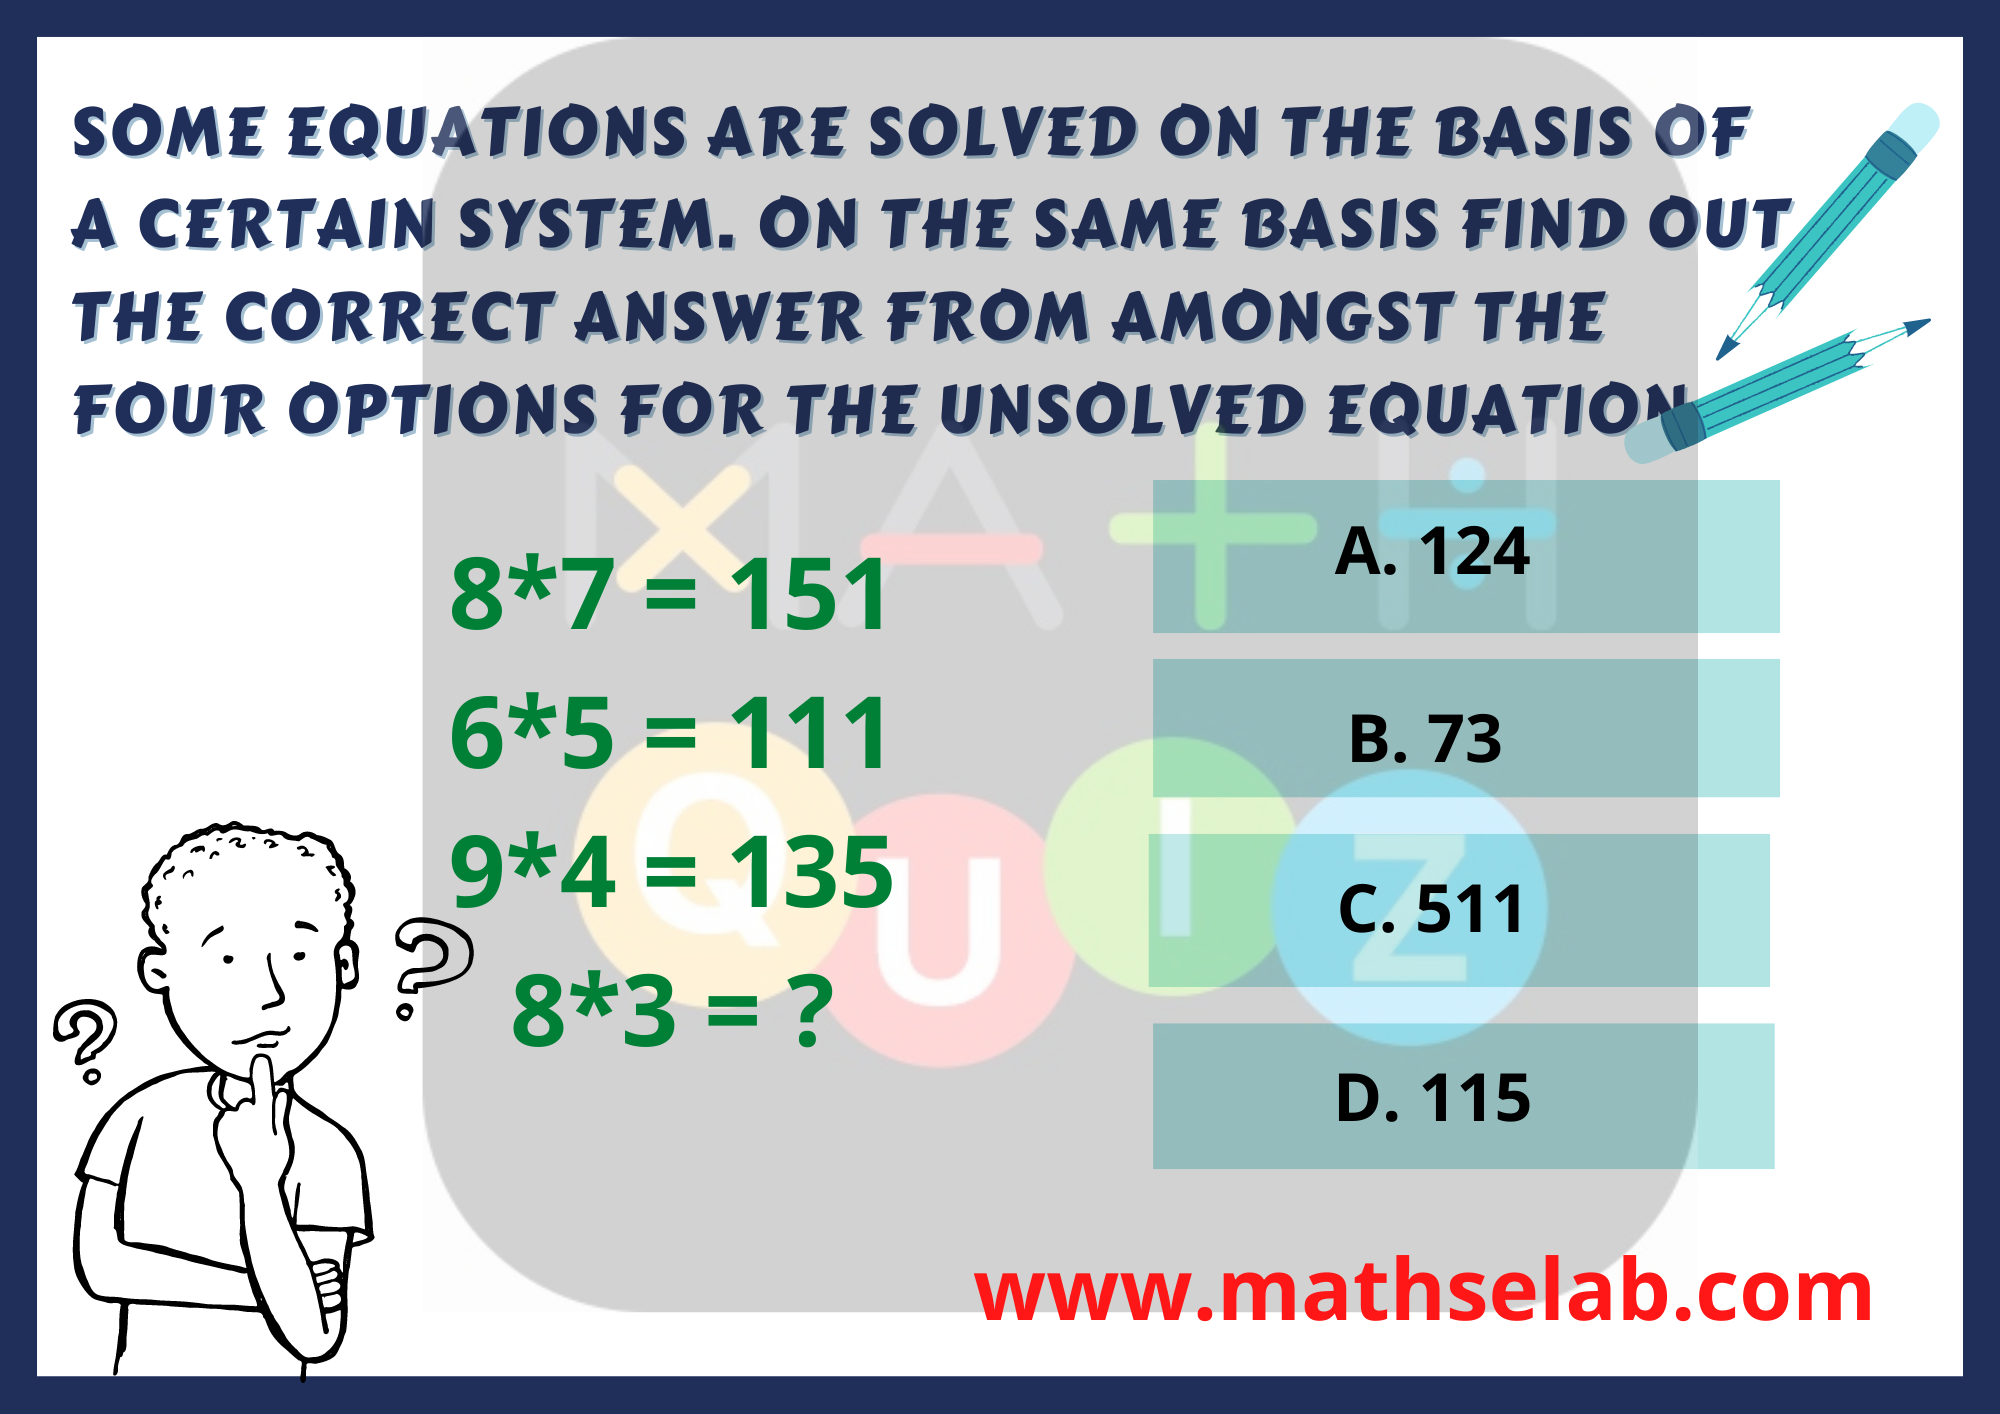 Some equations are solved on the basis of a certain system. On the same basis find out the correct answer from amongst the four options for the unsolved equation. 8*7 = 151, 6*5 = 111, 9*4 = 135, and 8*3 = ?